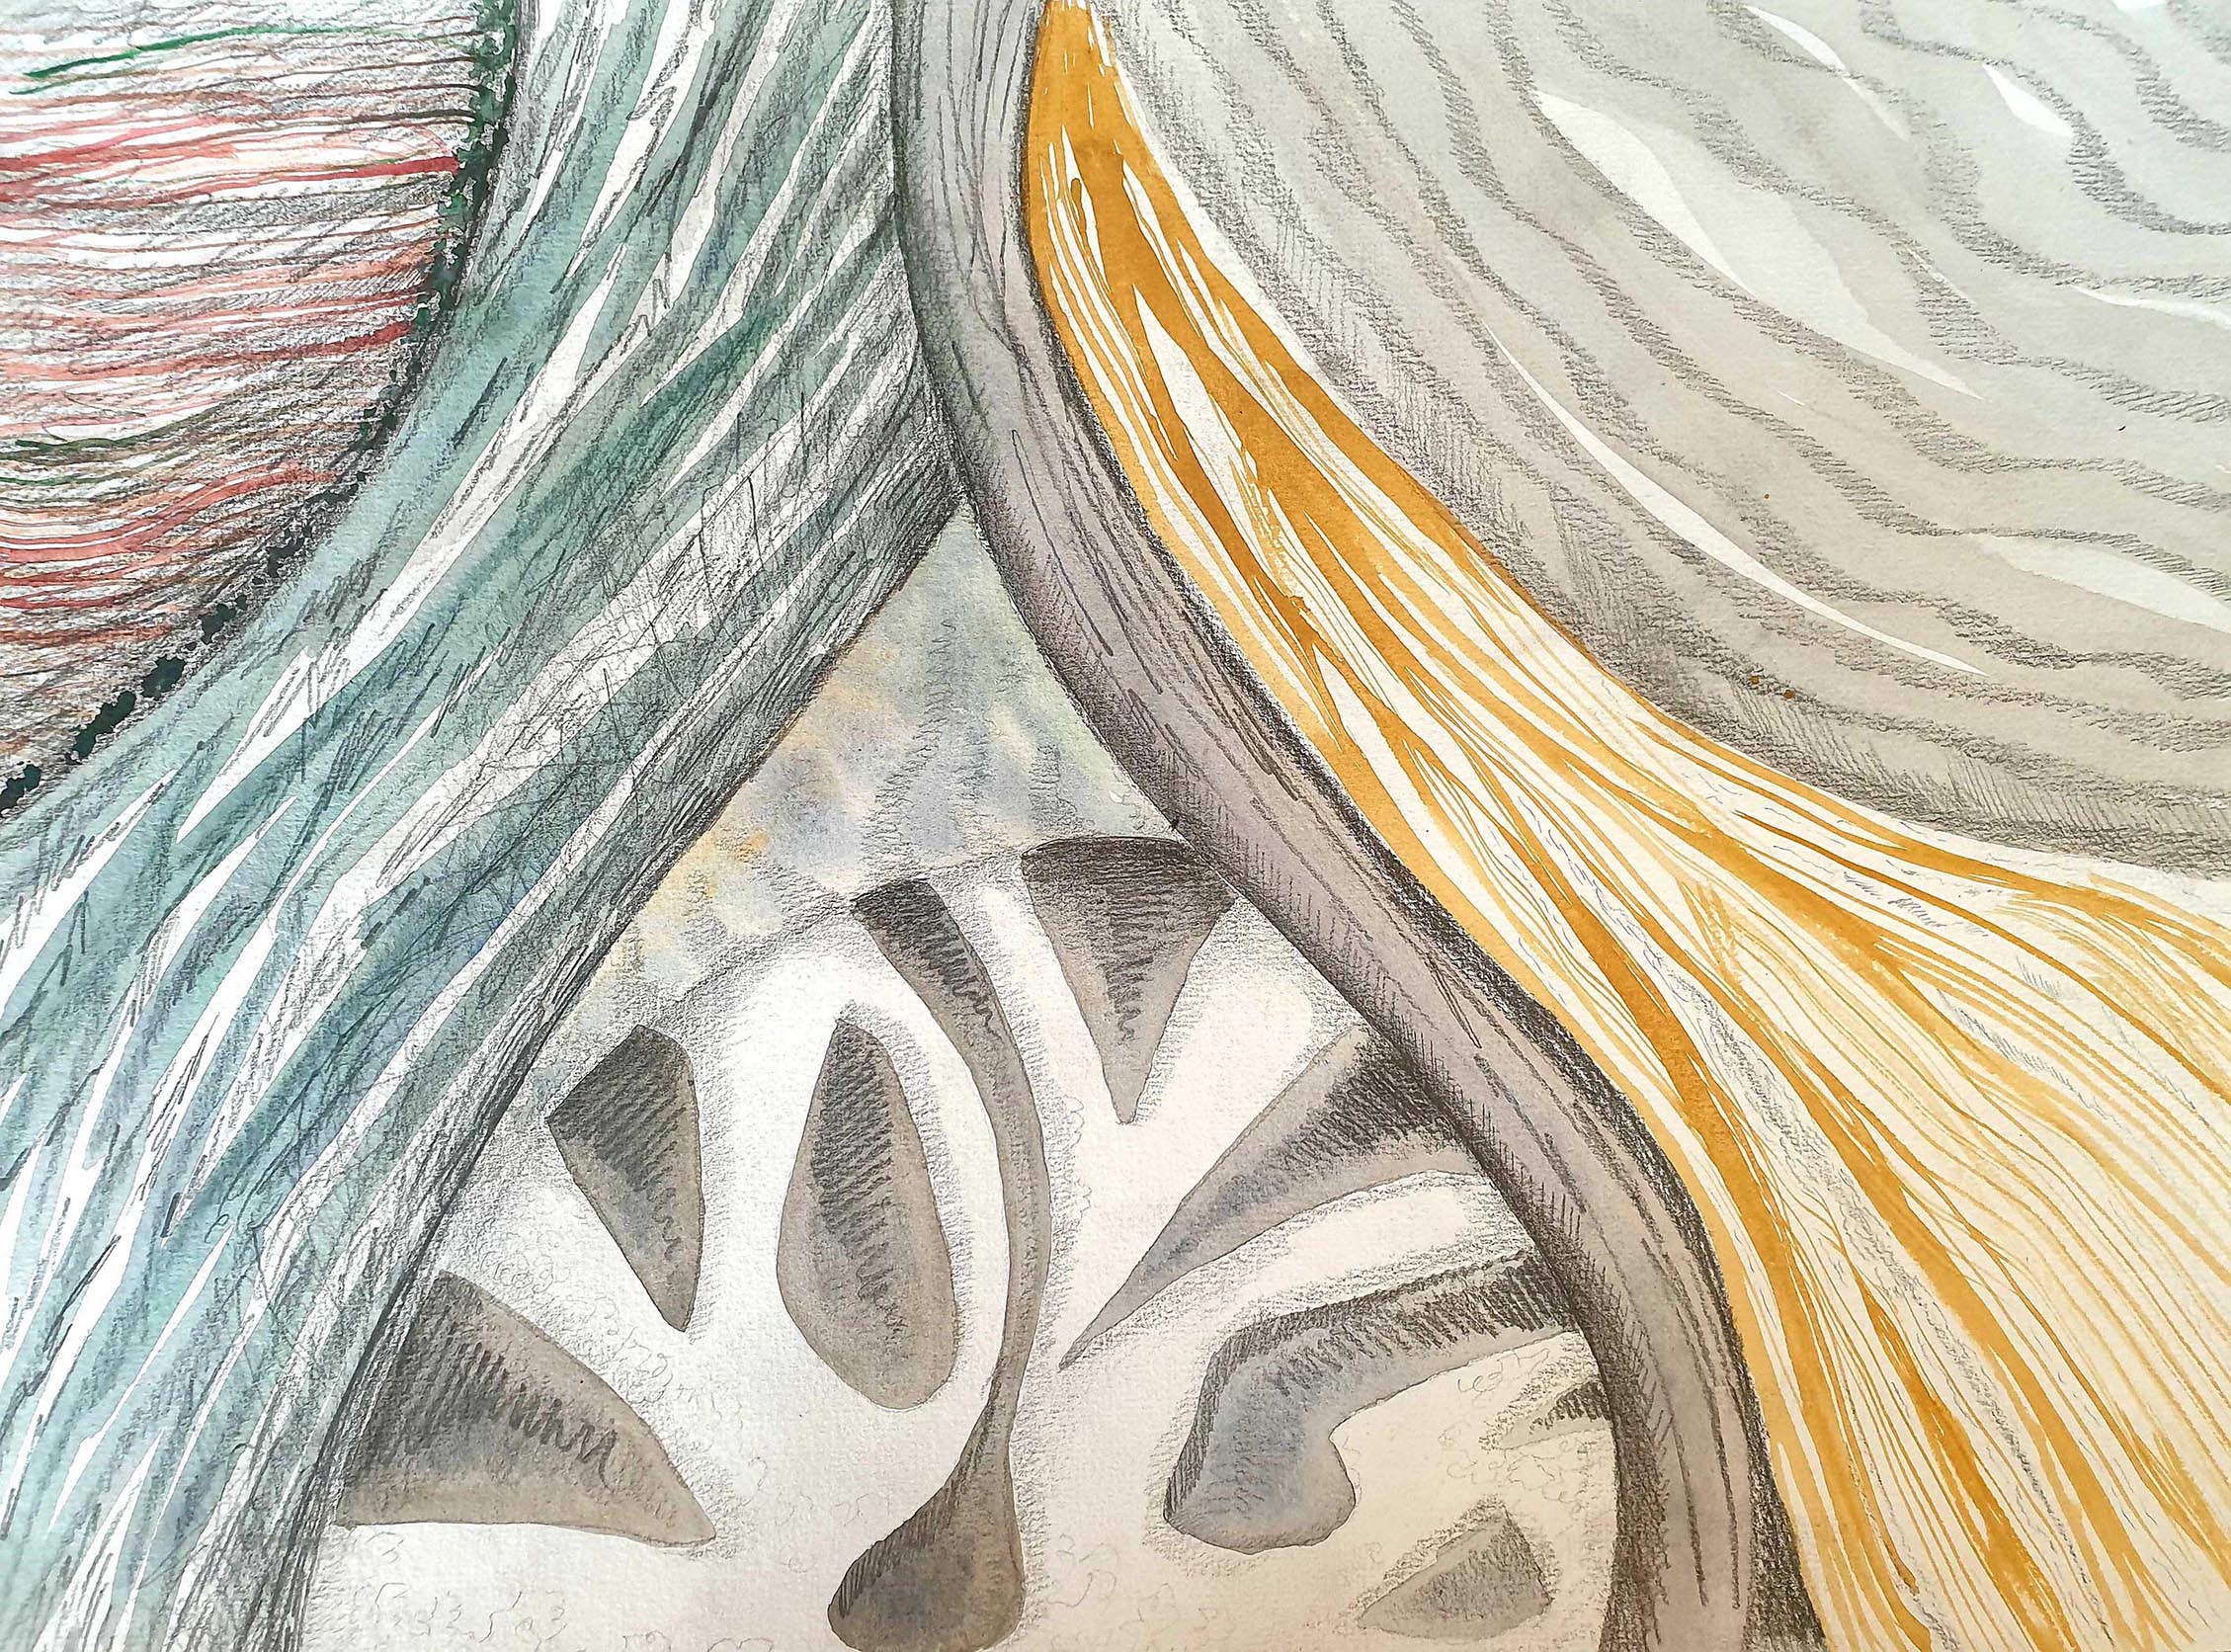 Watercolour and pencil drawing of flowing fabric like landscape with round organic shapes and patterns, small marks and shading, colours in soft ochre tones and greys.